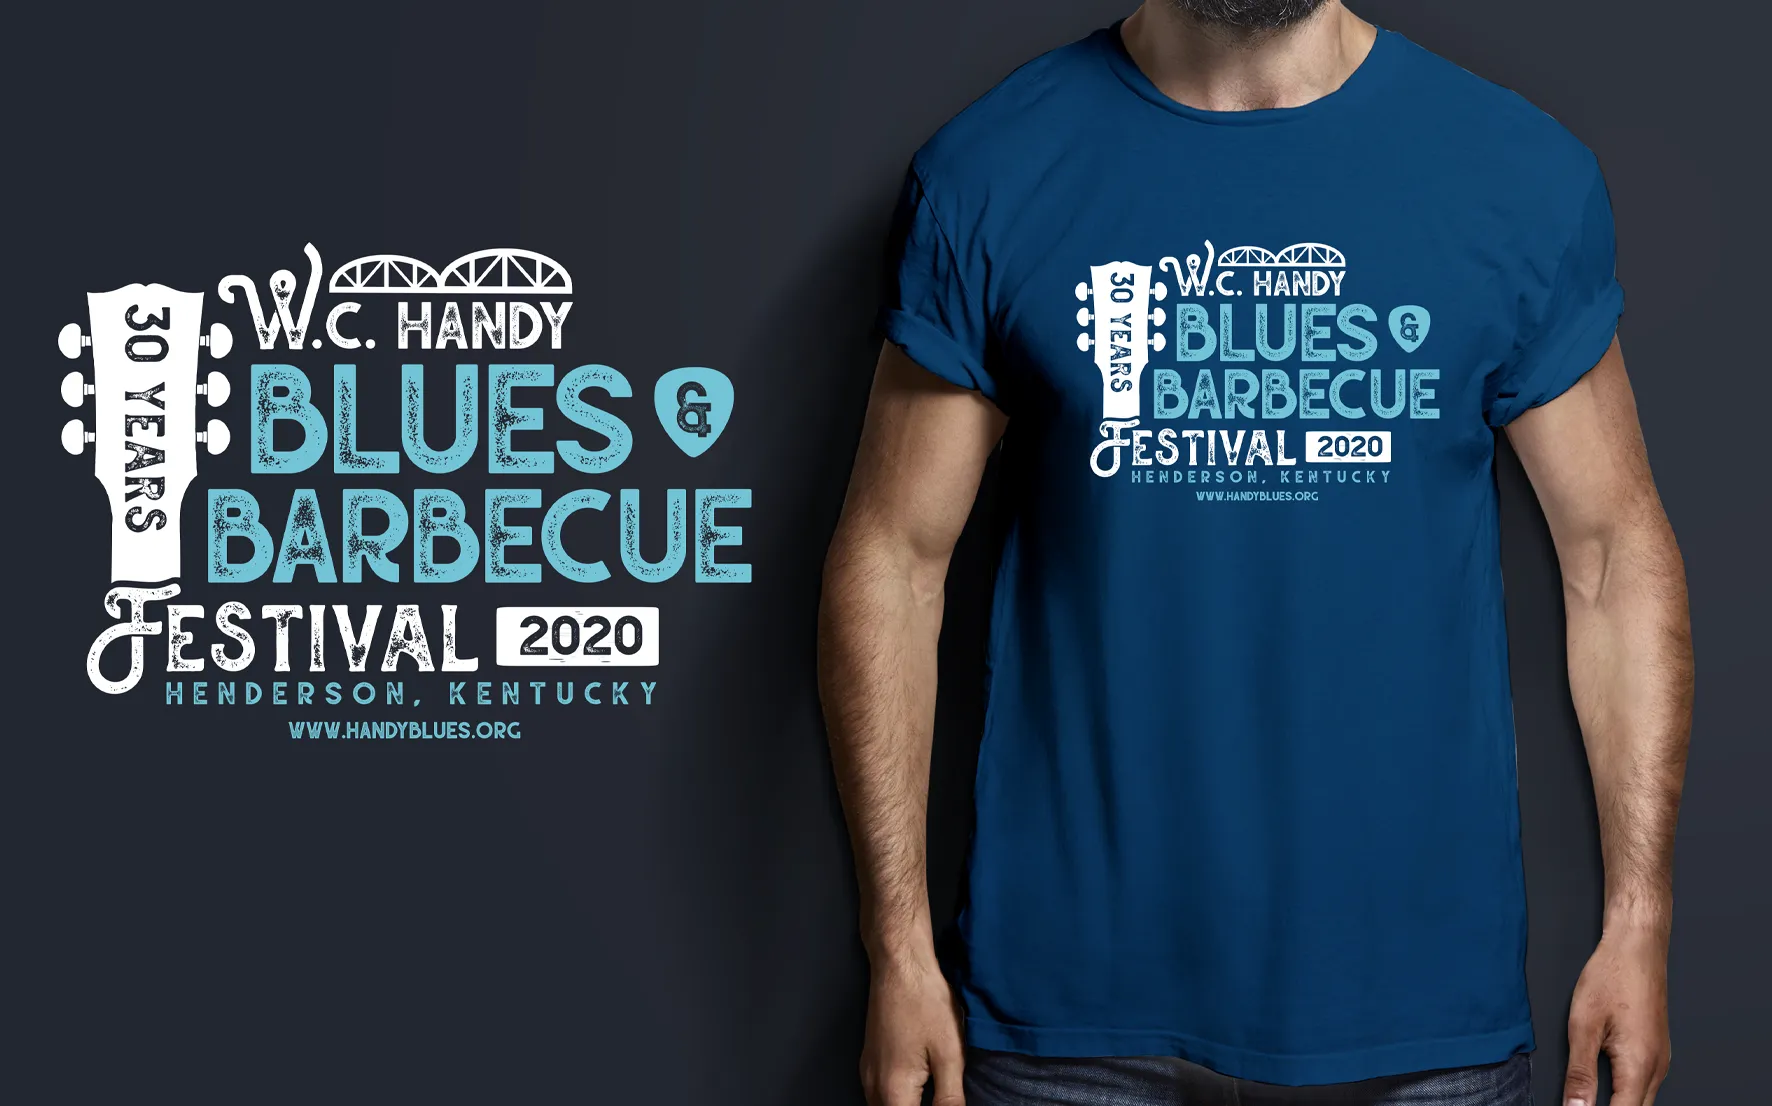 WC Handy Blues and Barbecue Festival Logo on Tee Shirt